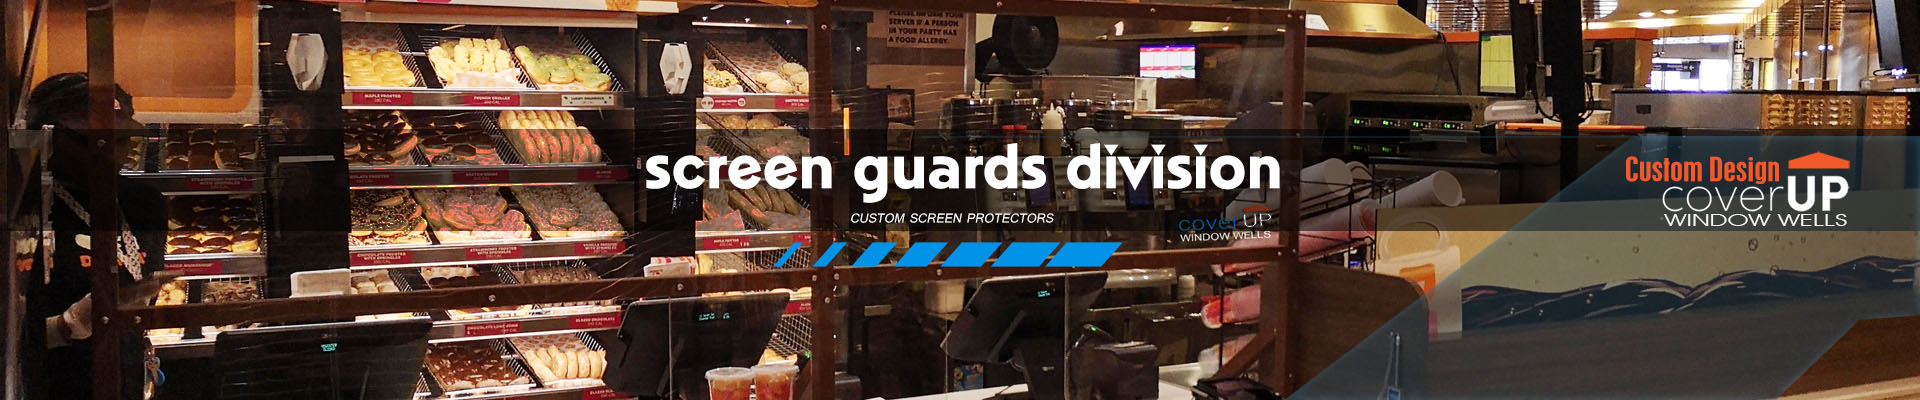 Screen Guards Division company in Chicago Colorado Denver Midwest